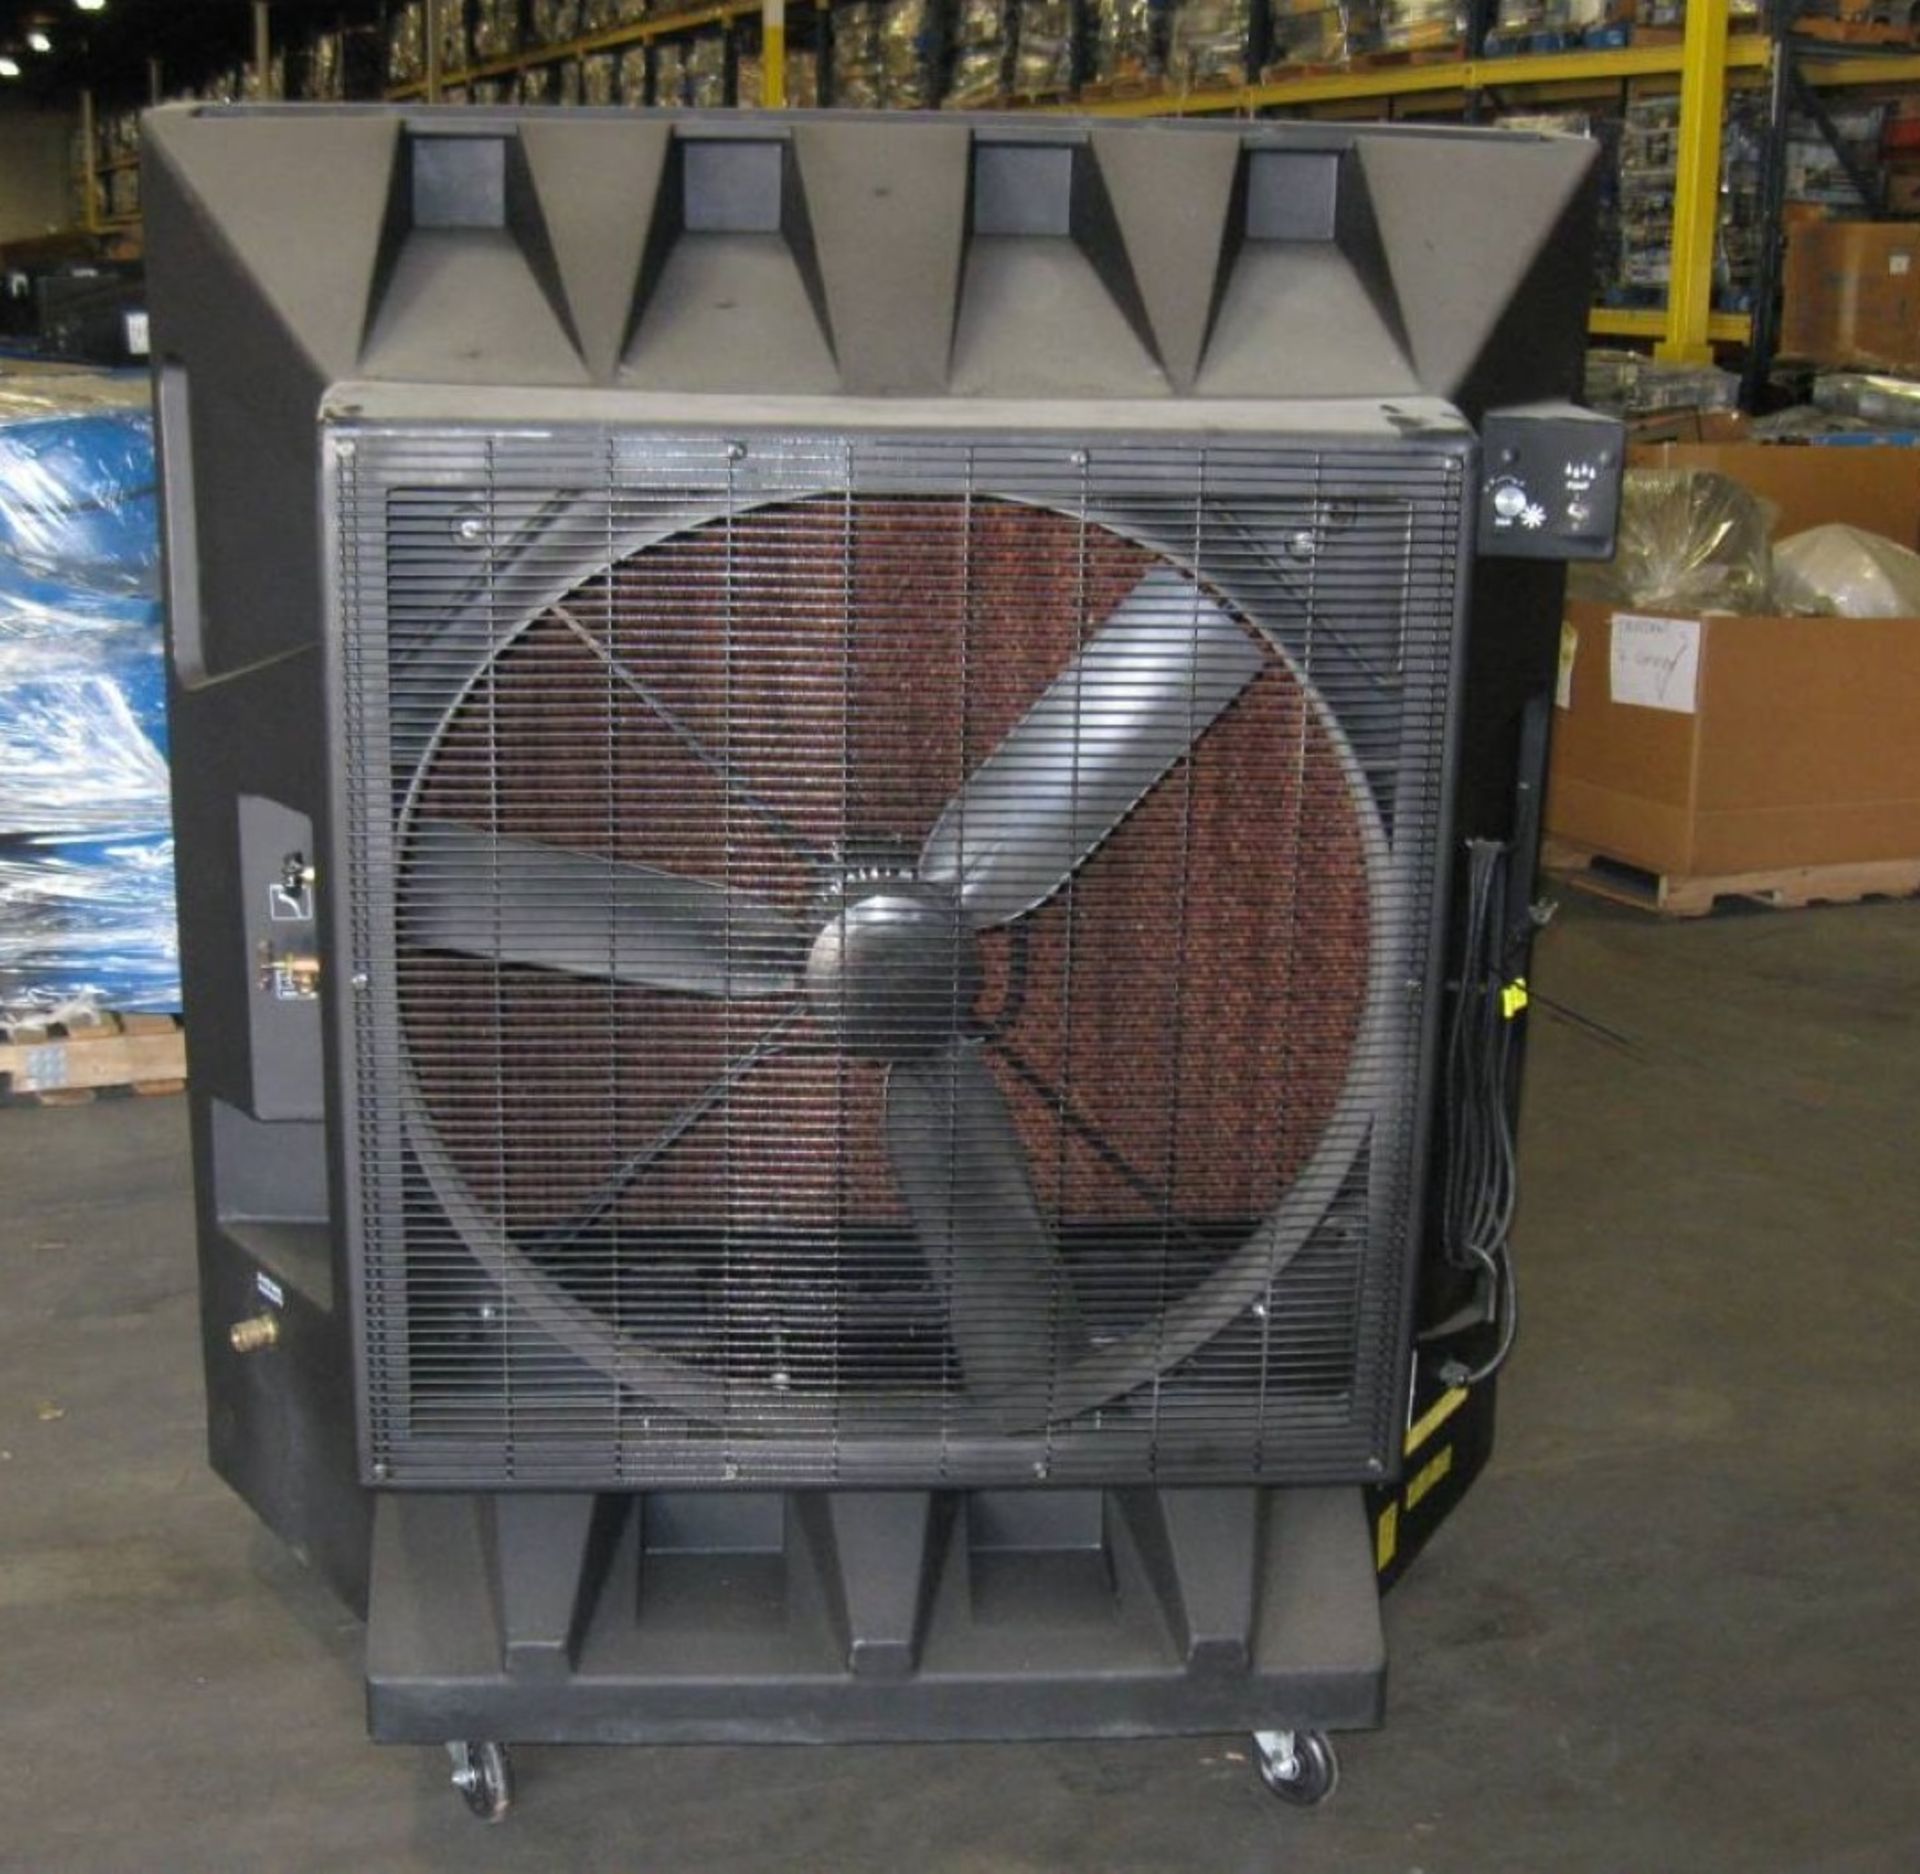 2500 SQFT CAPACITY 36" PORTABLE EVAPORATIVE AIR COOLER (NEW IN A BOX) - Image 6 of 6